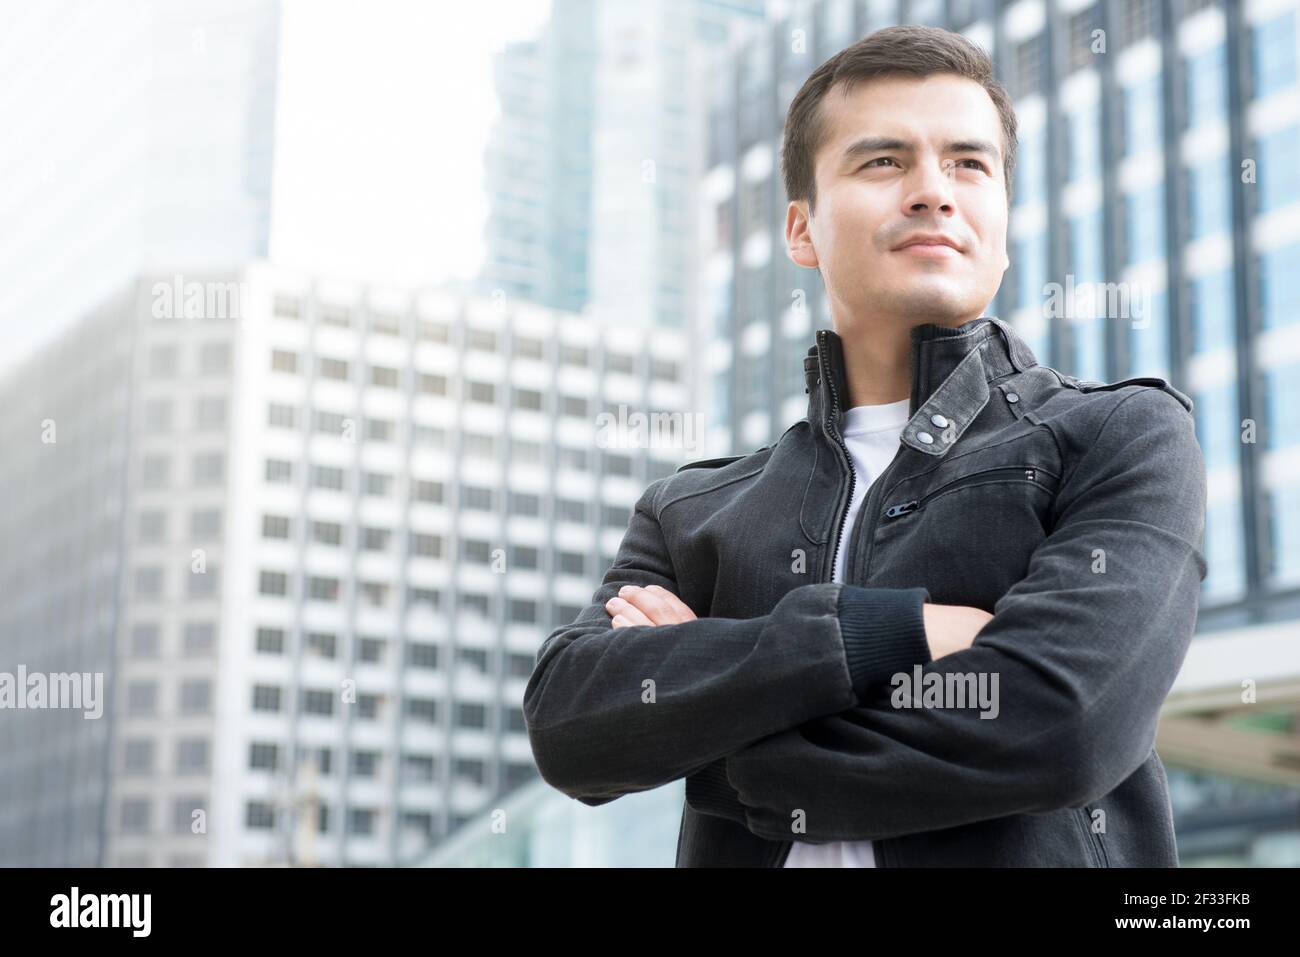 Handsome man with crossed arms standing in the city Stock Photo